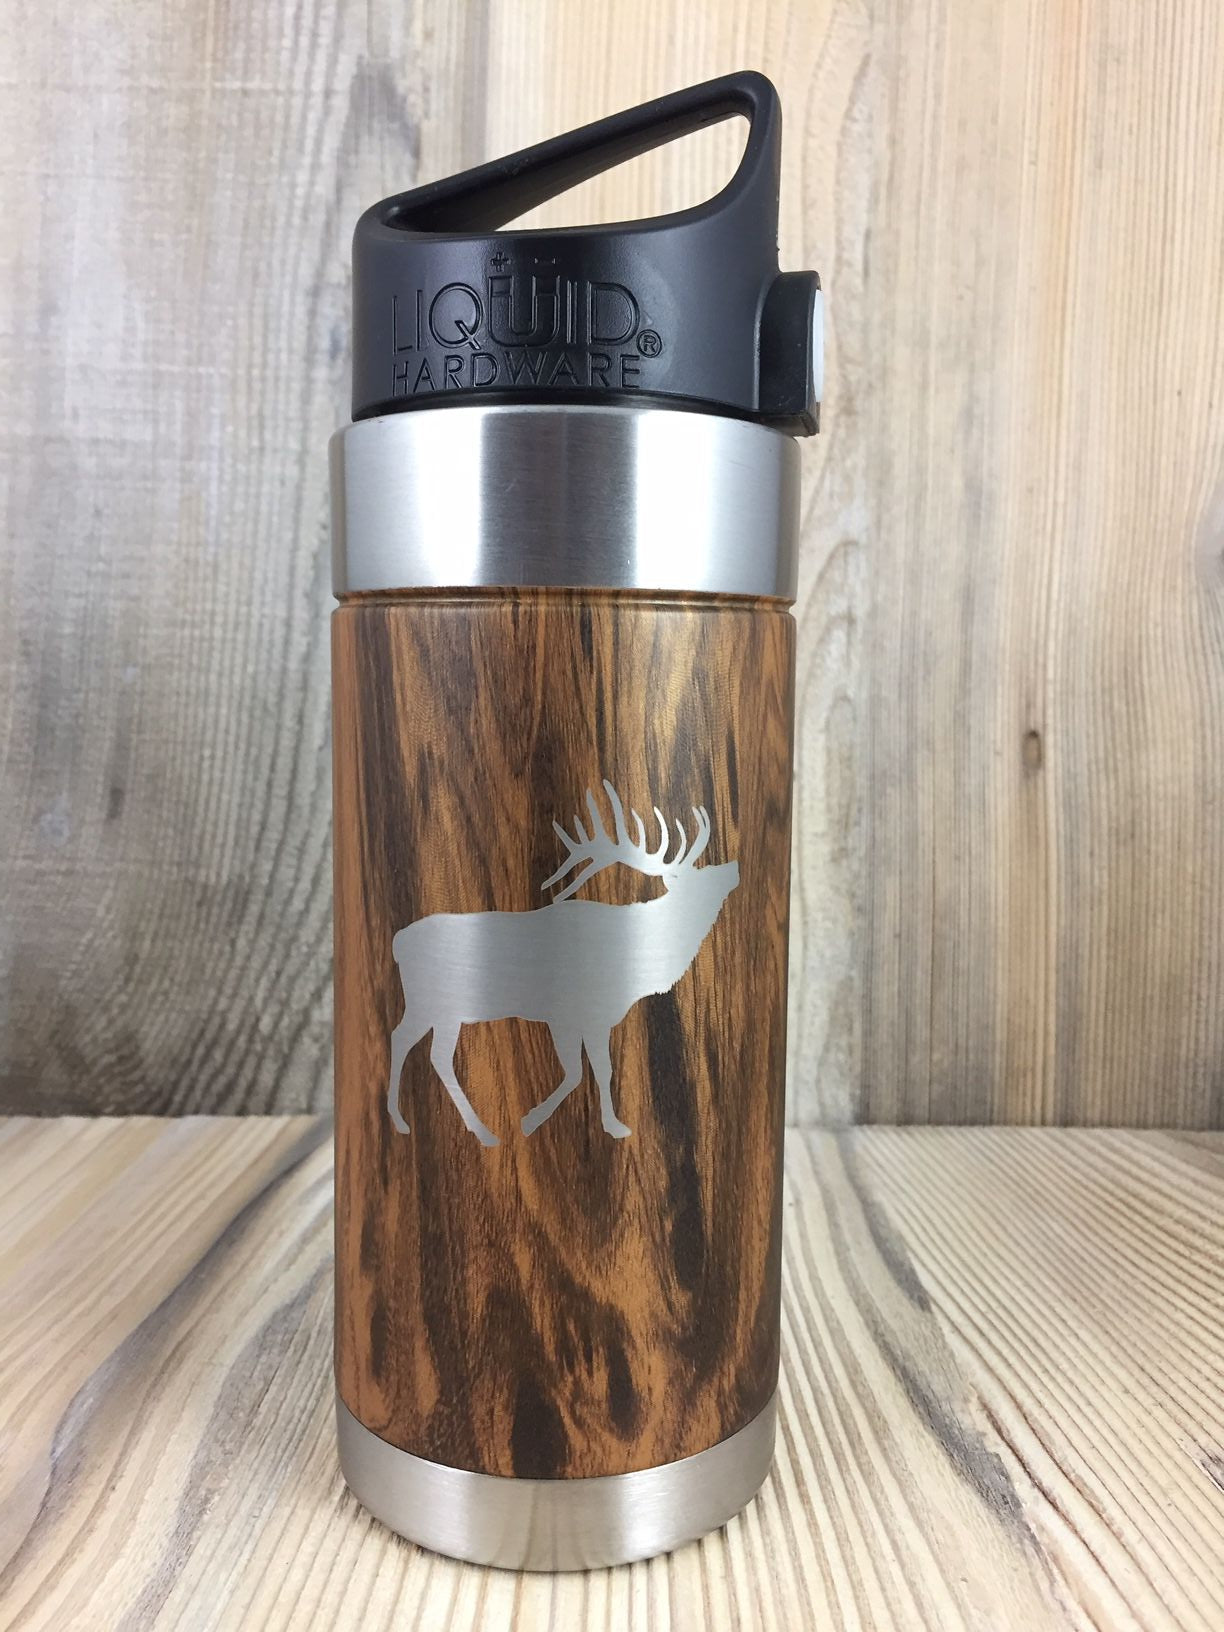 Sidewinder™ Wide Mouth Vacuum Insulated Water Bottle - Rocky Mountain Series